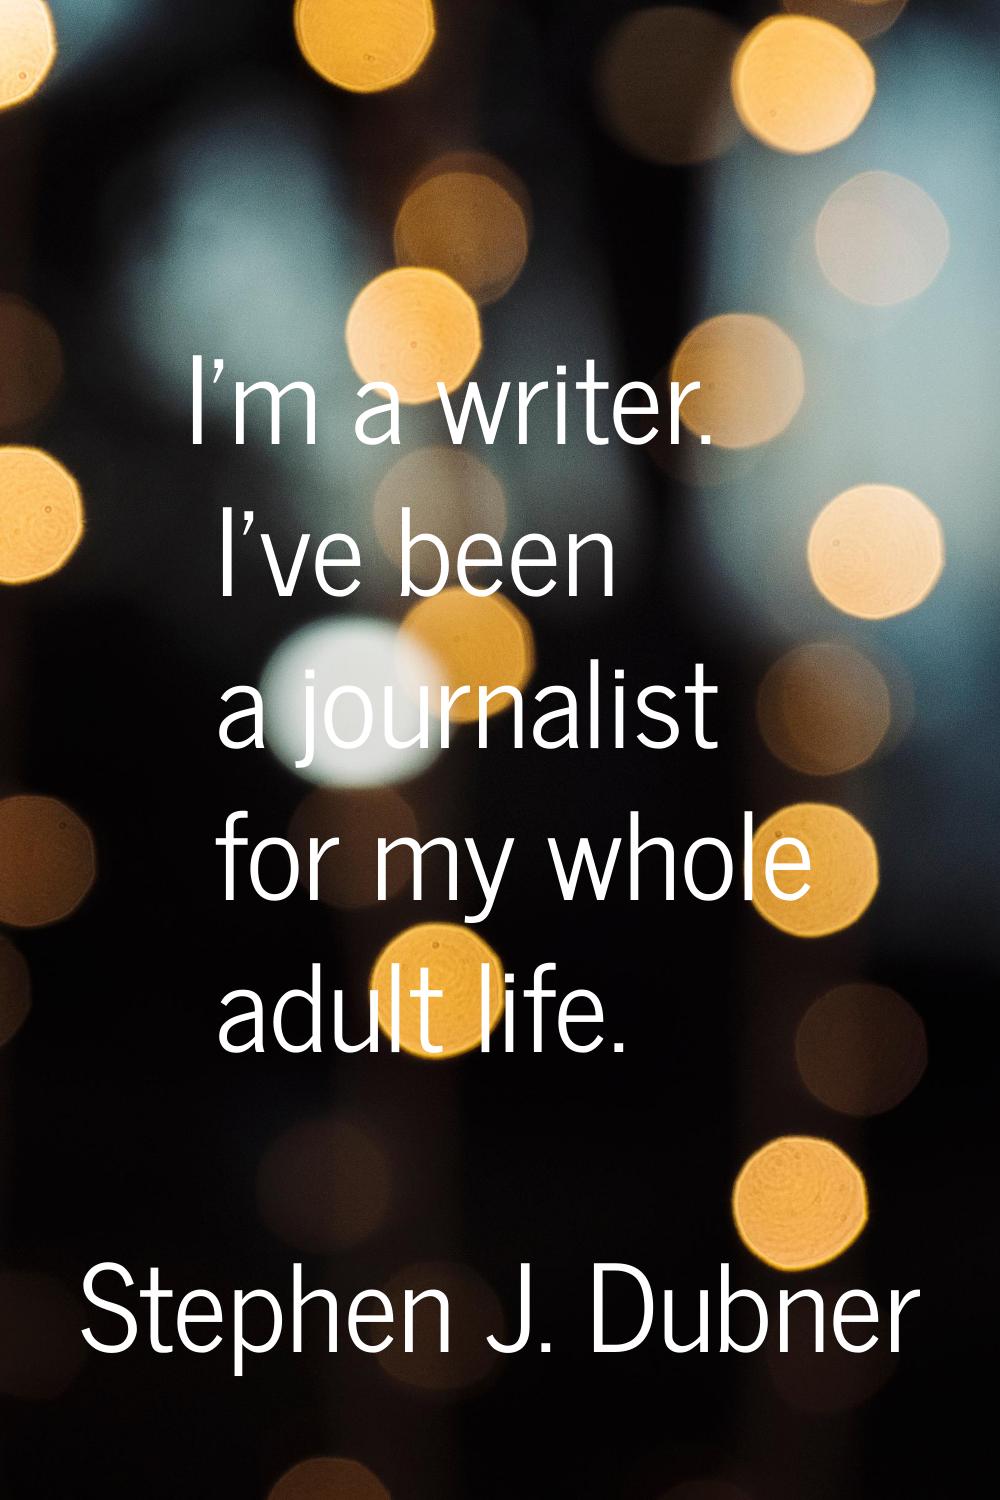 I'm a writer. I've been a journalist for my whole adult life.